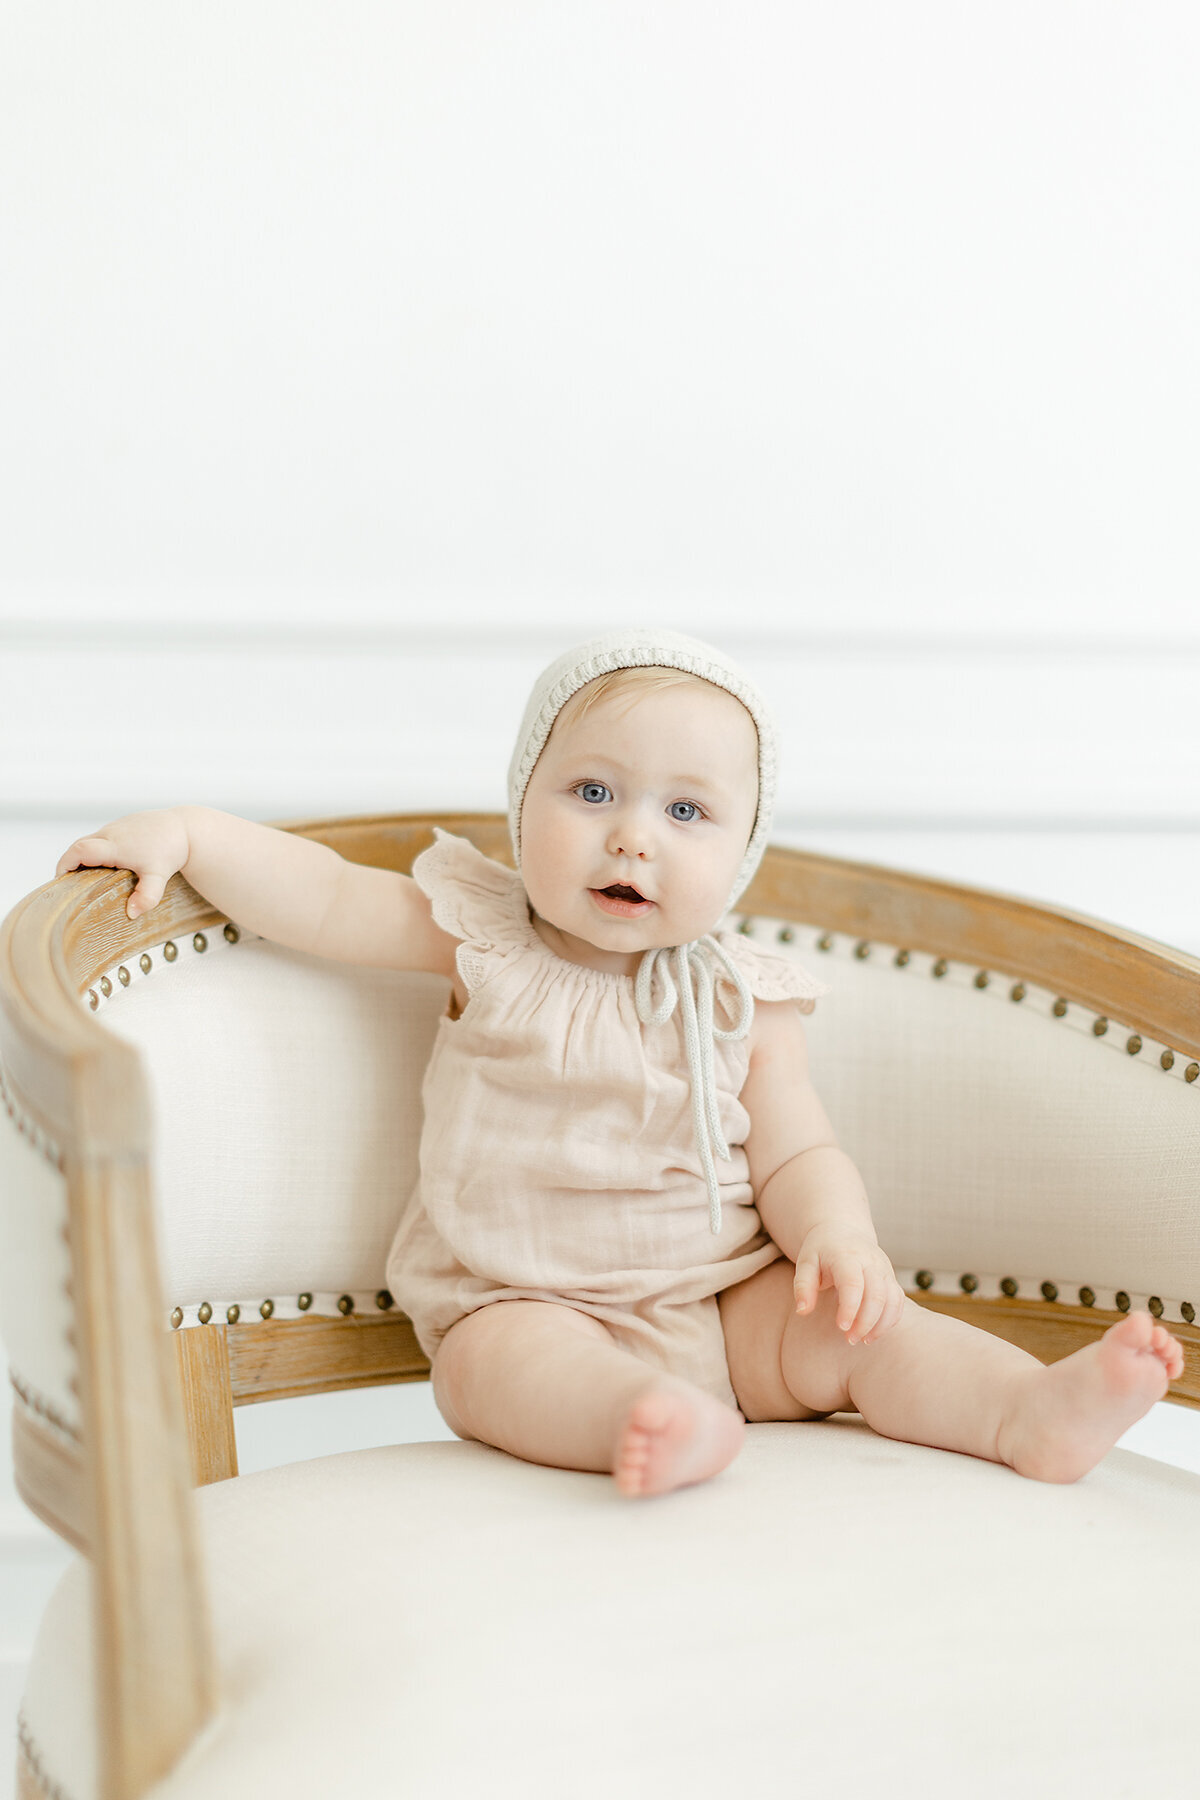 A in studio milestone session of a baby girl sitting on a chair.